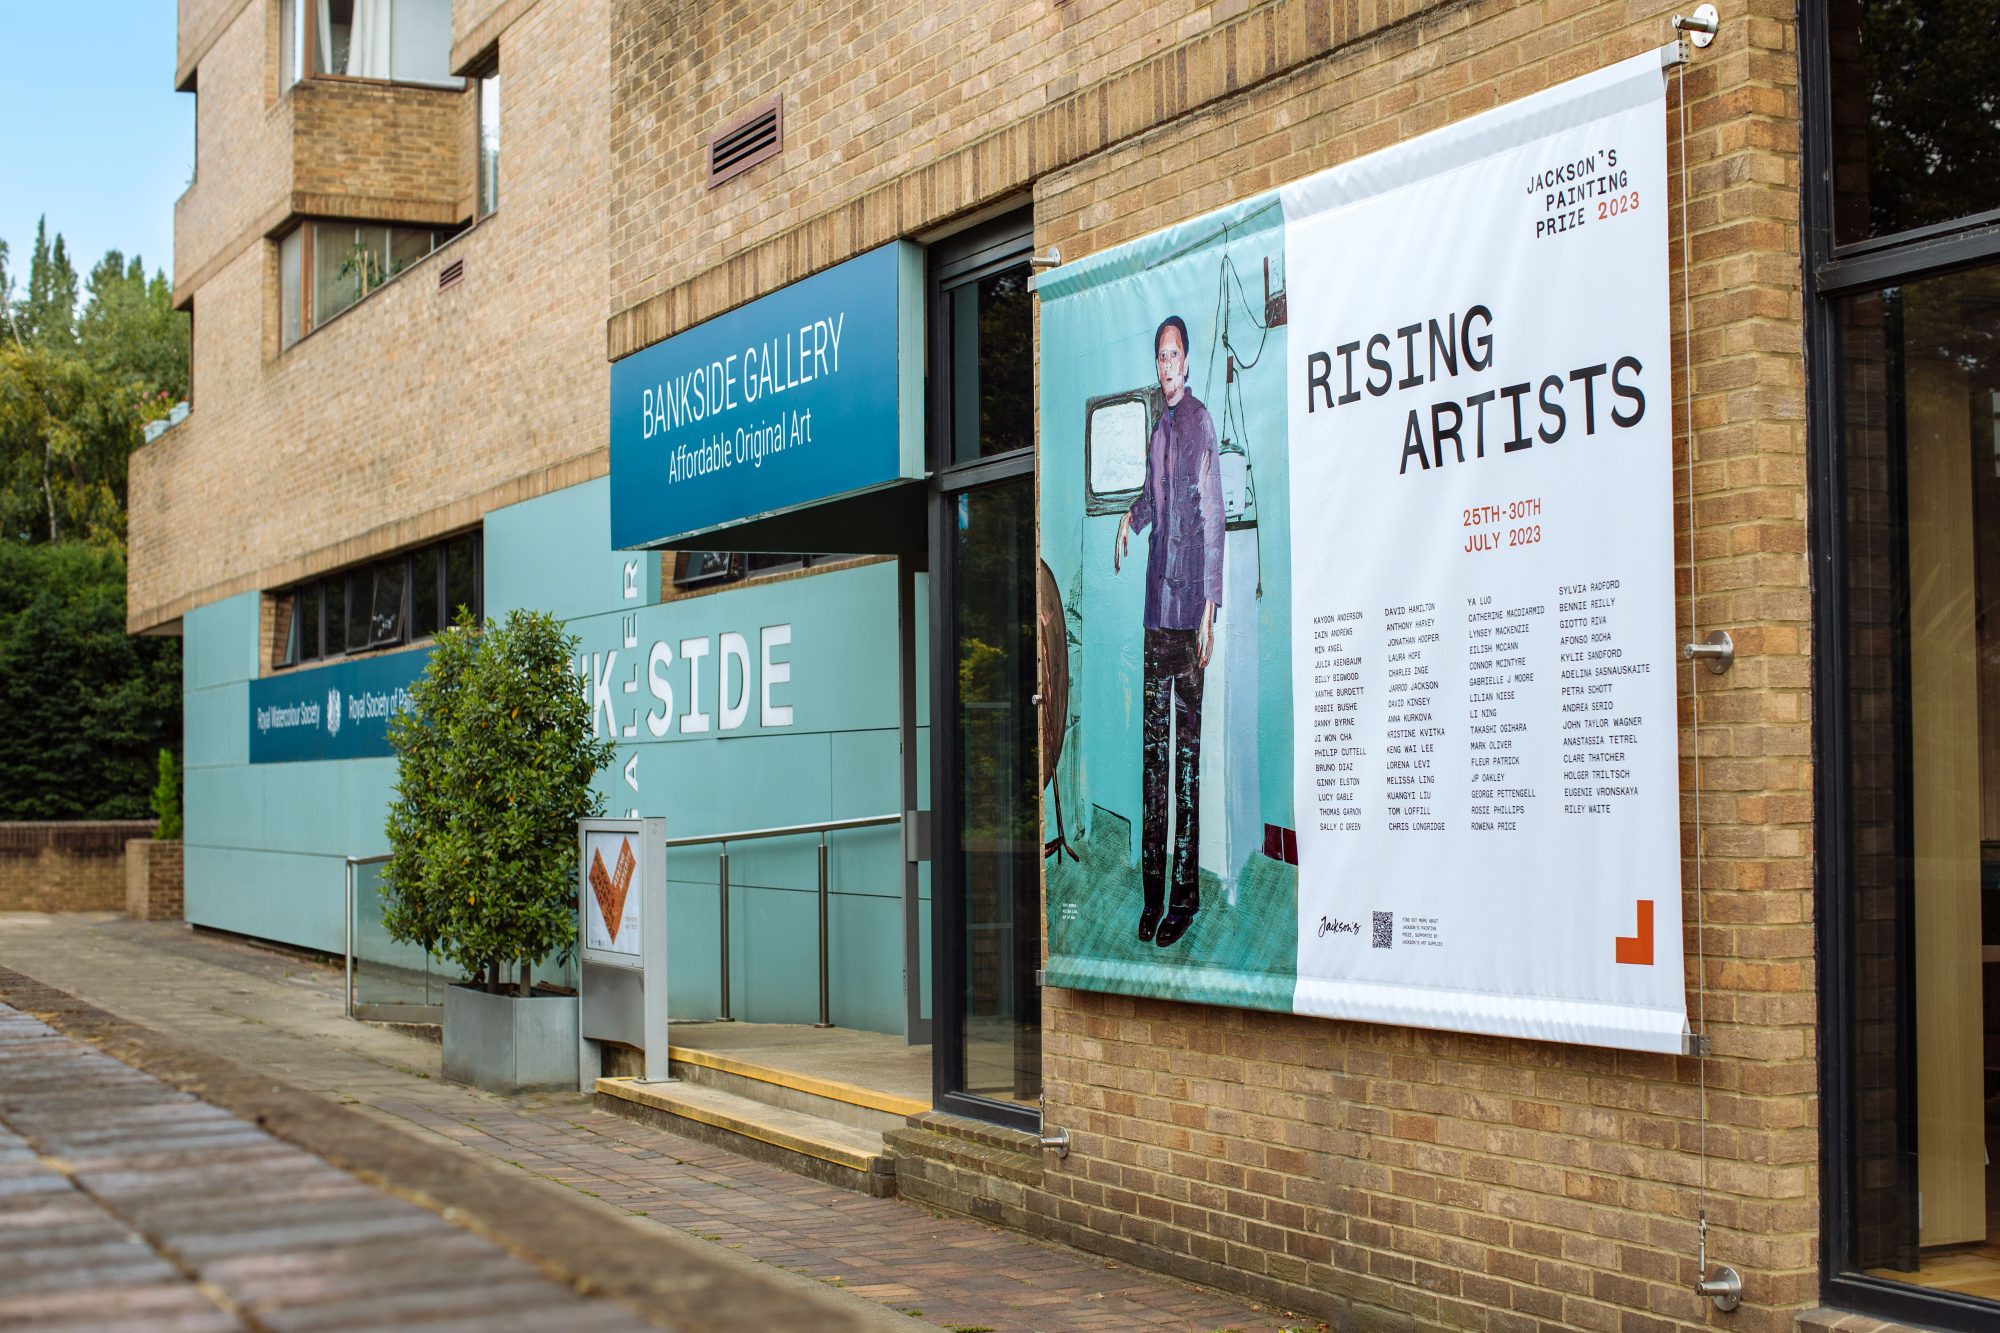 Jackson’s Painting Prize 2023 Exhibition At Bankside Gallery